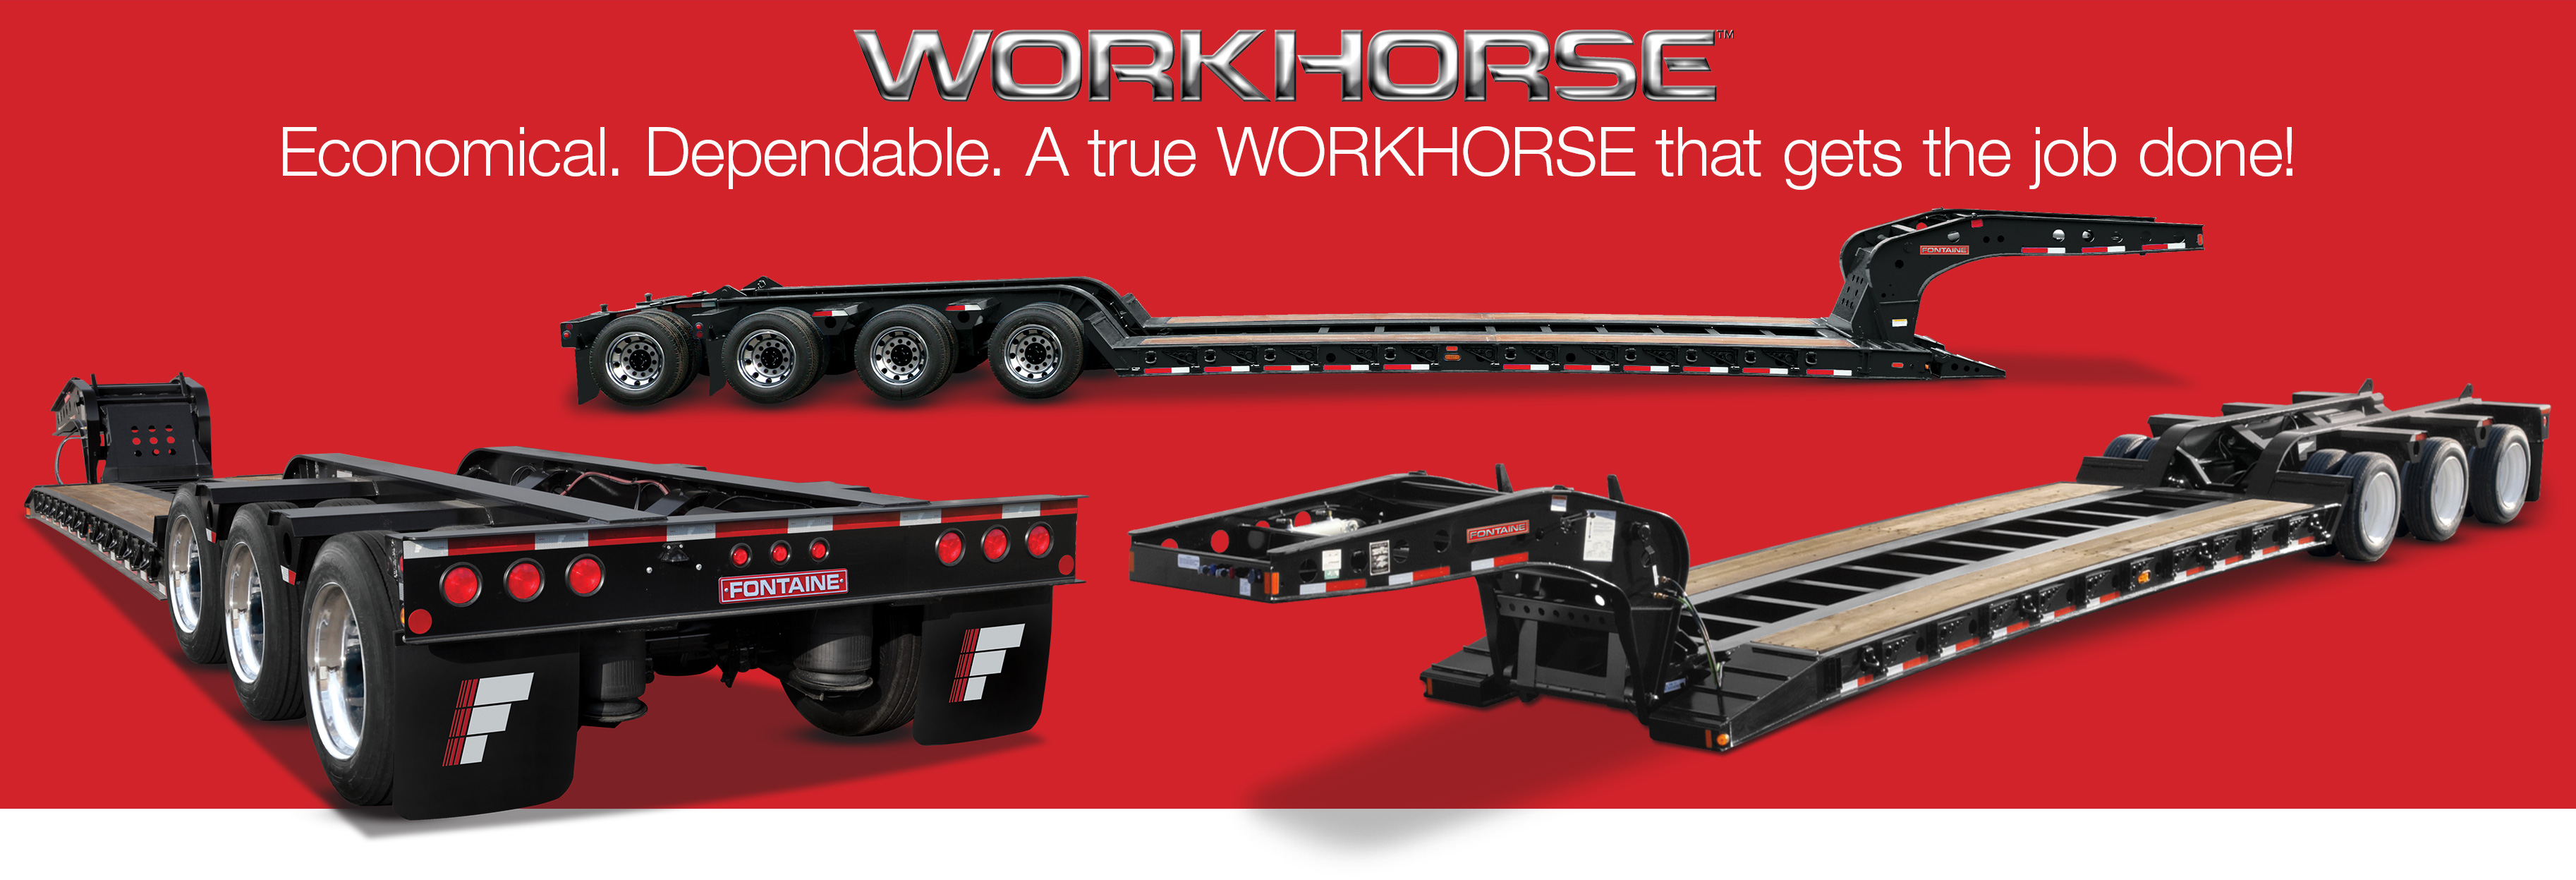 Fontaine Heavy Haul Workhorse Trailers